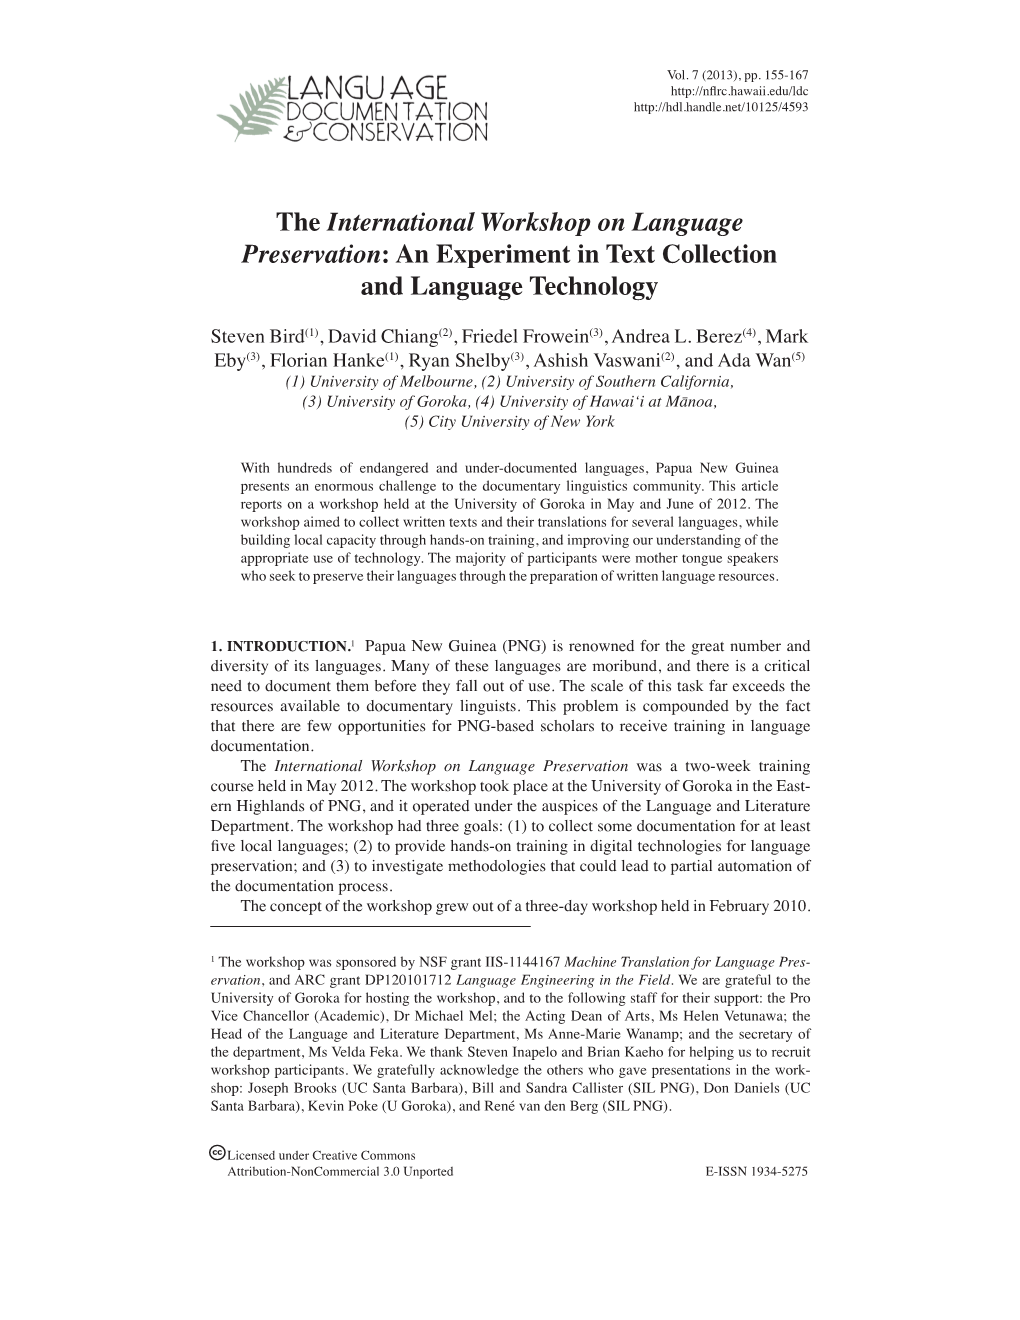 The International Workshop on Language Preservation: an Experiment in Text Collection and Language Technology